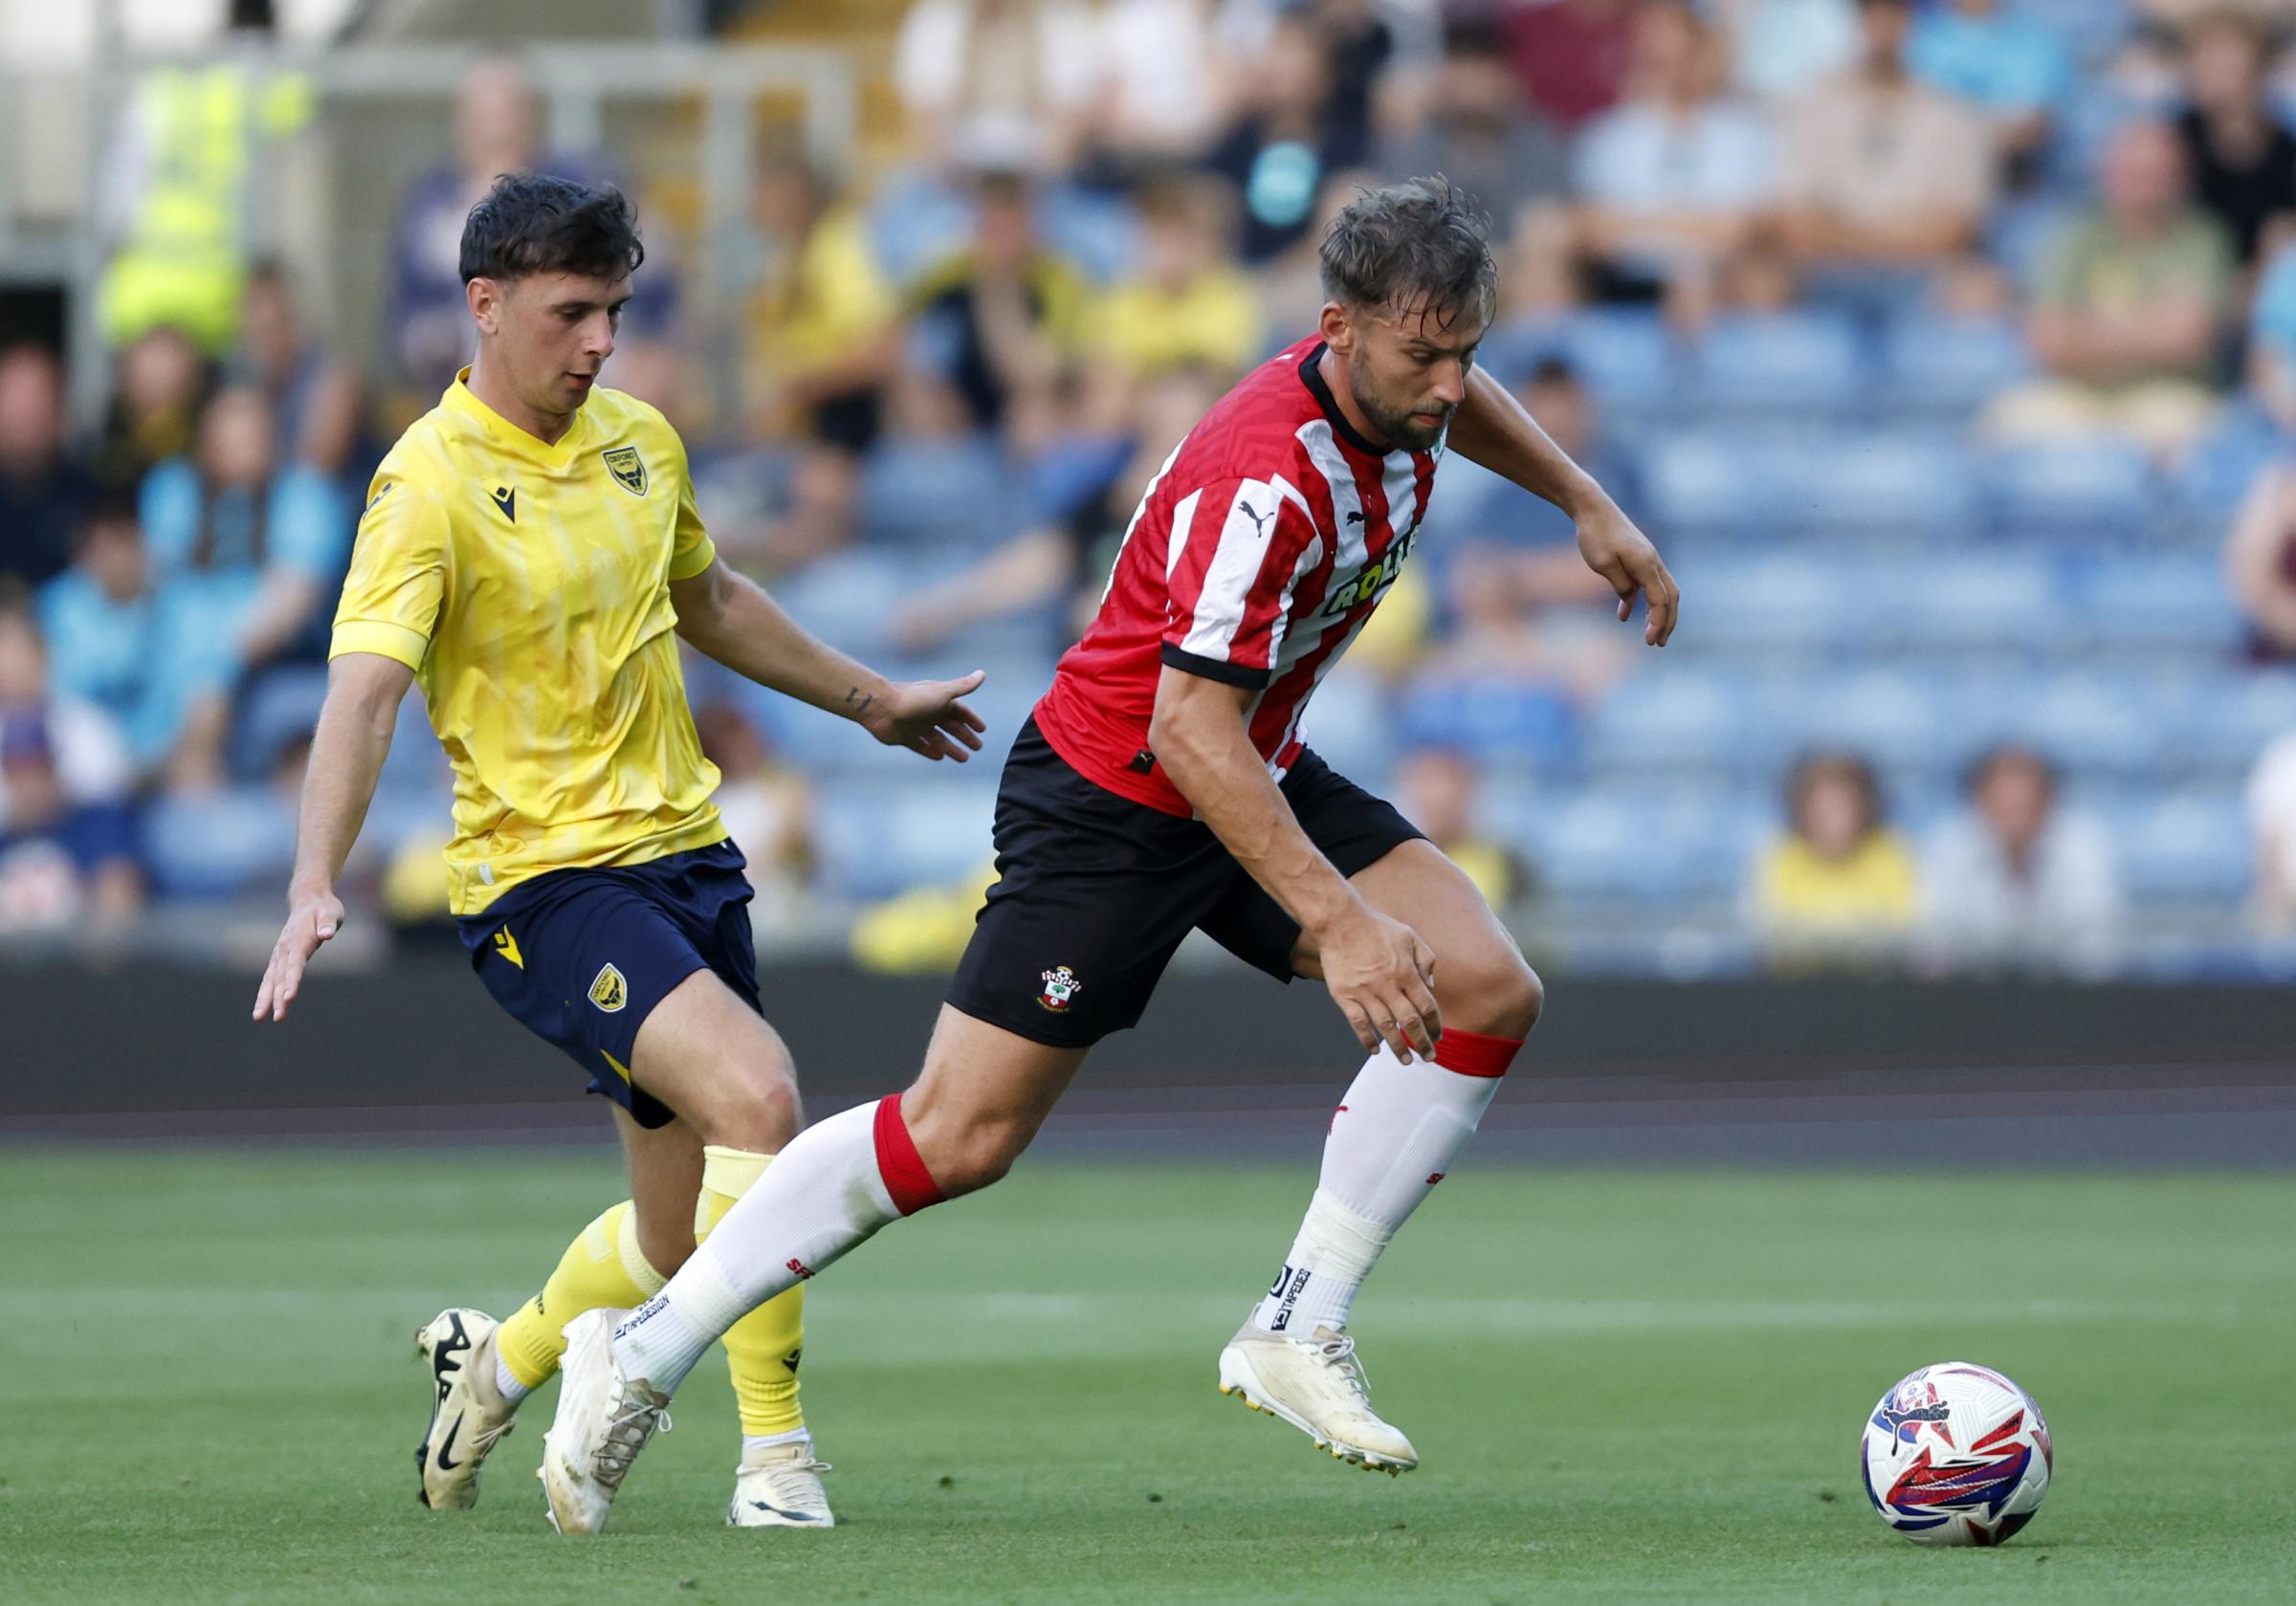 Southampton suffer first defeat of pre-season at Oxford United